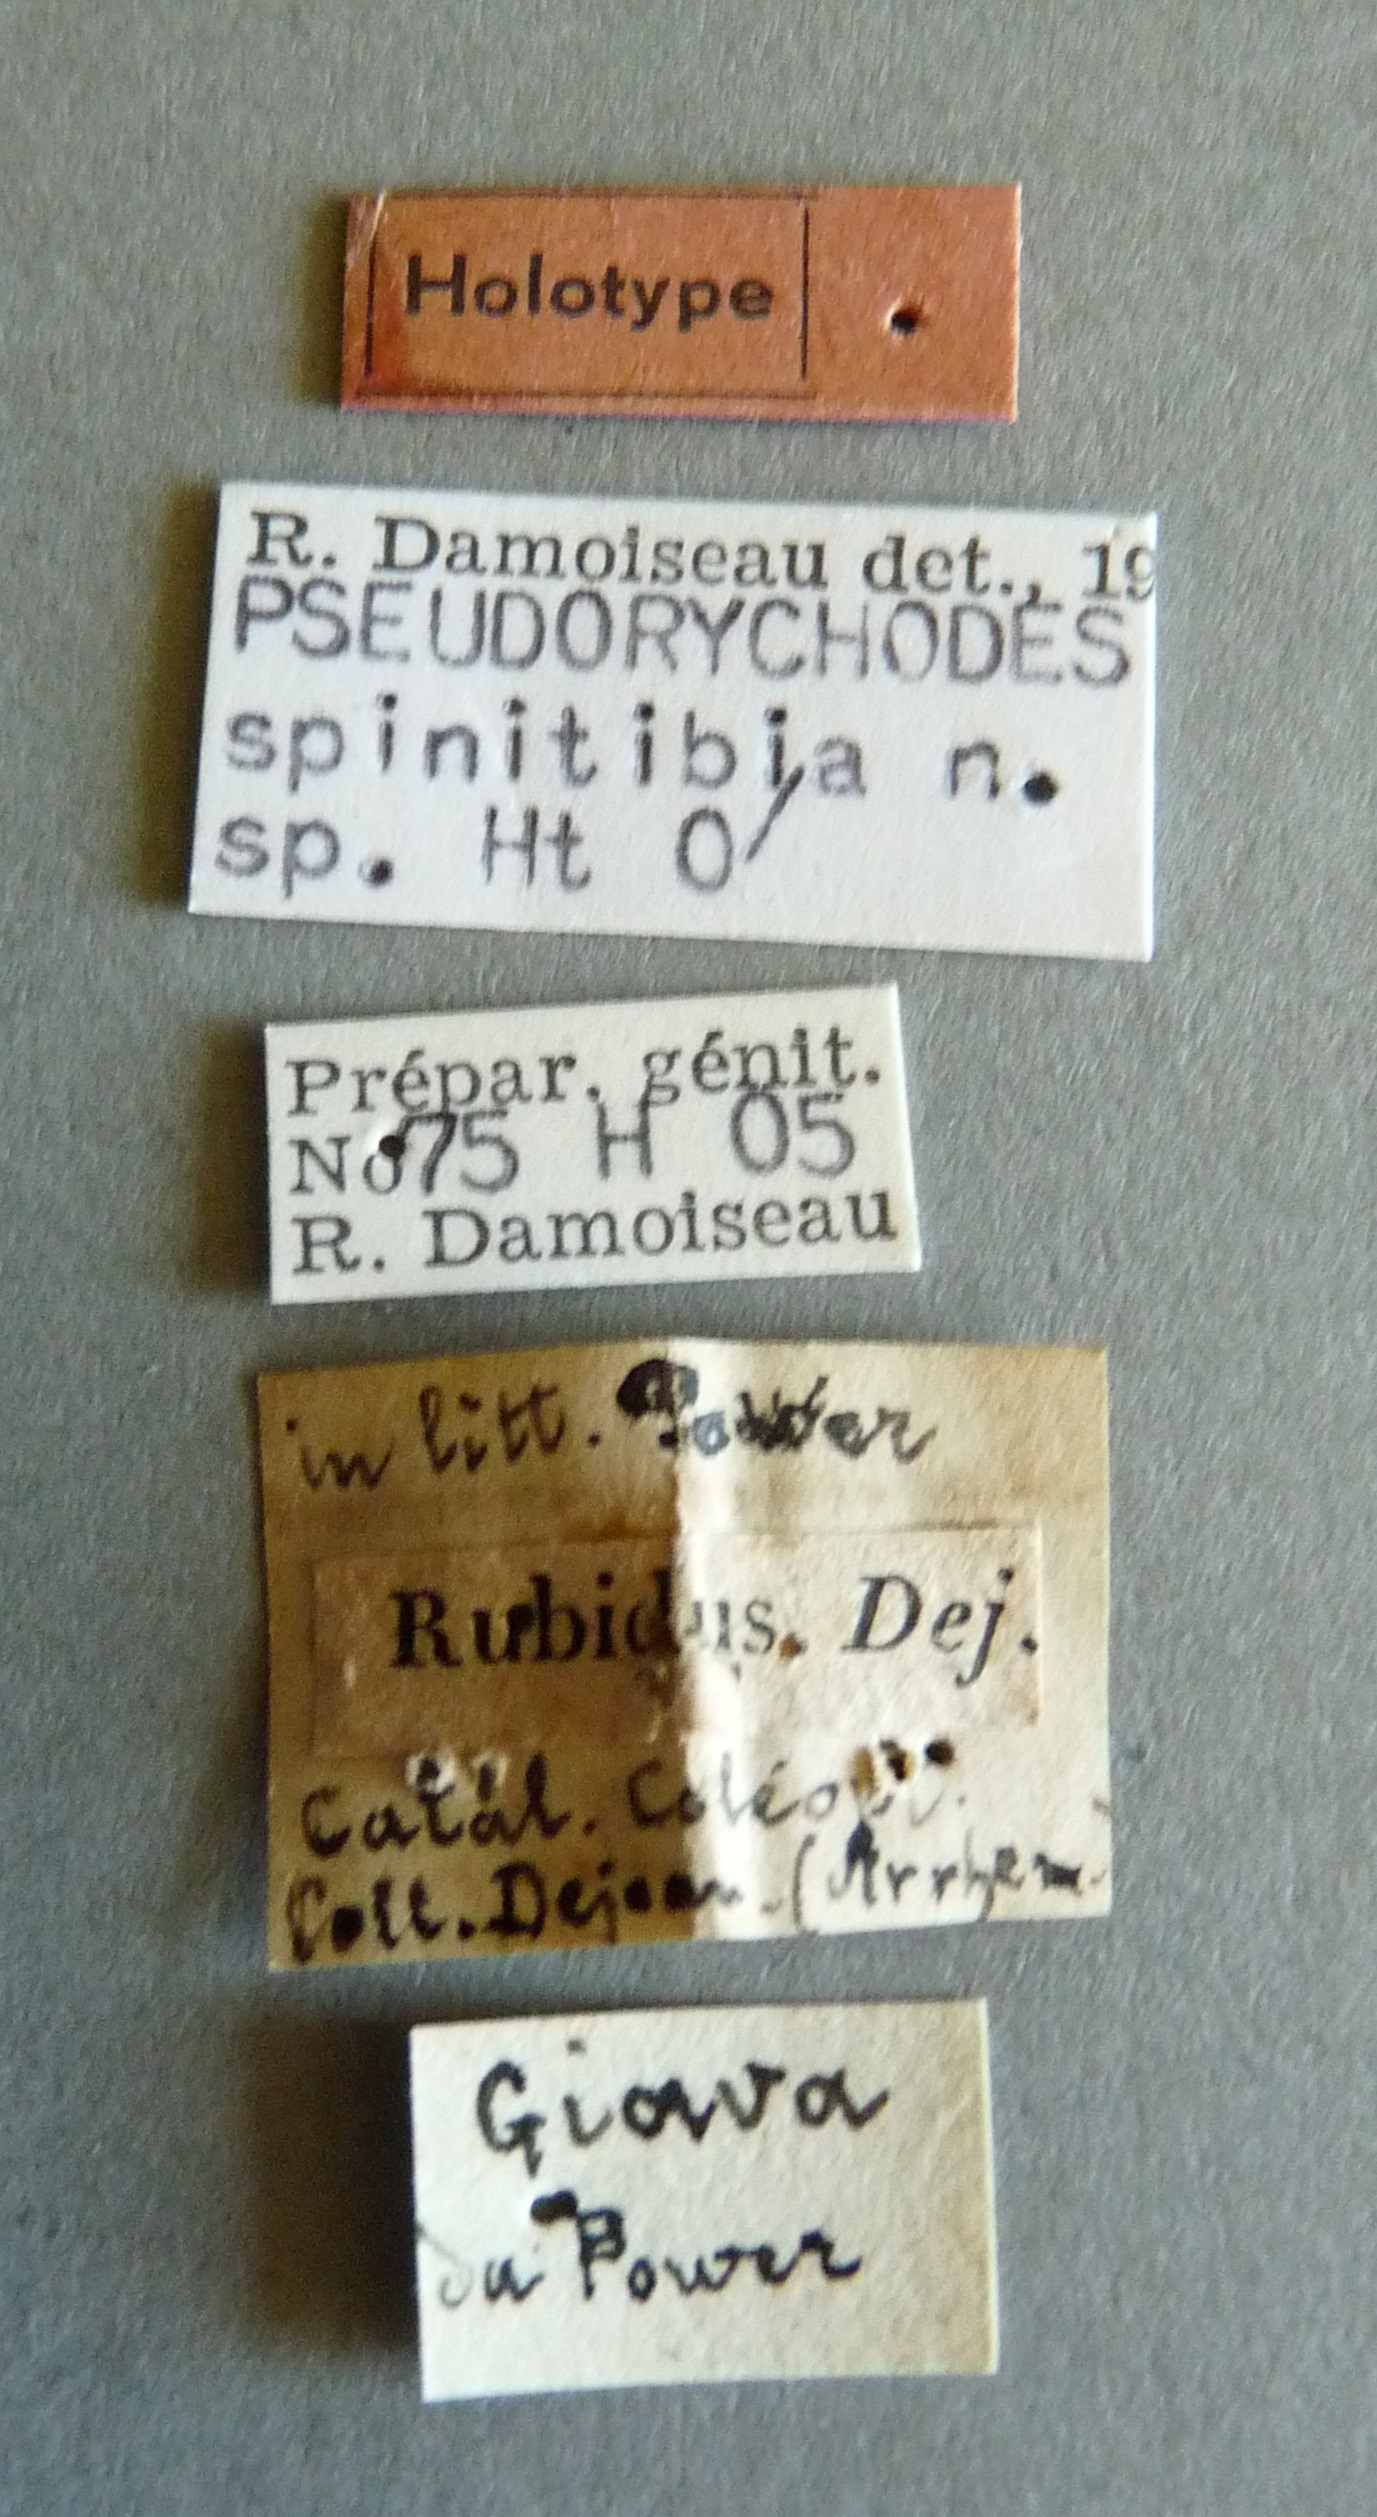 Pseudorychodes spinitibia ht Labels.jpg